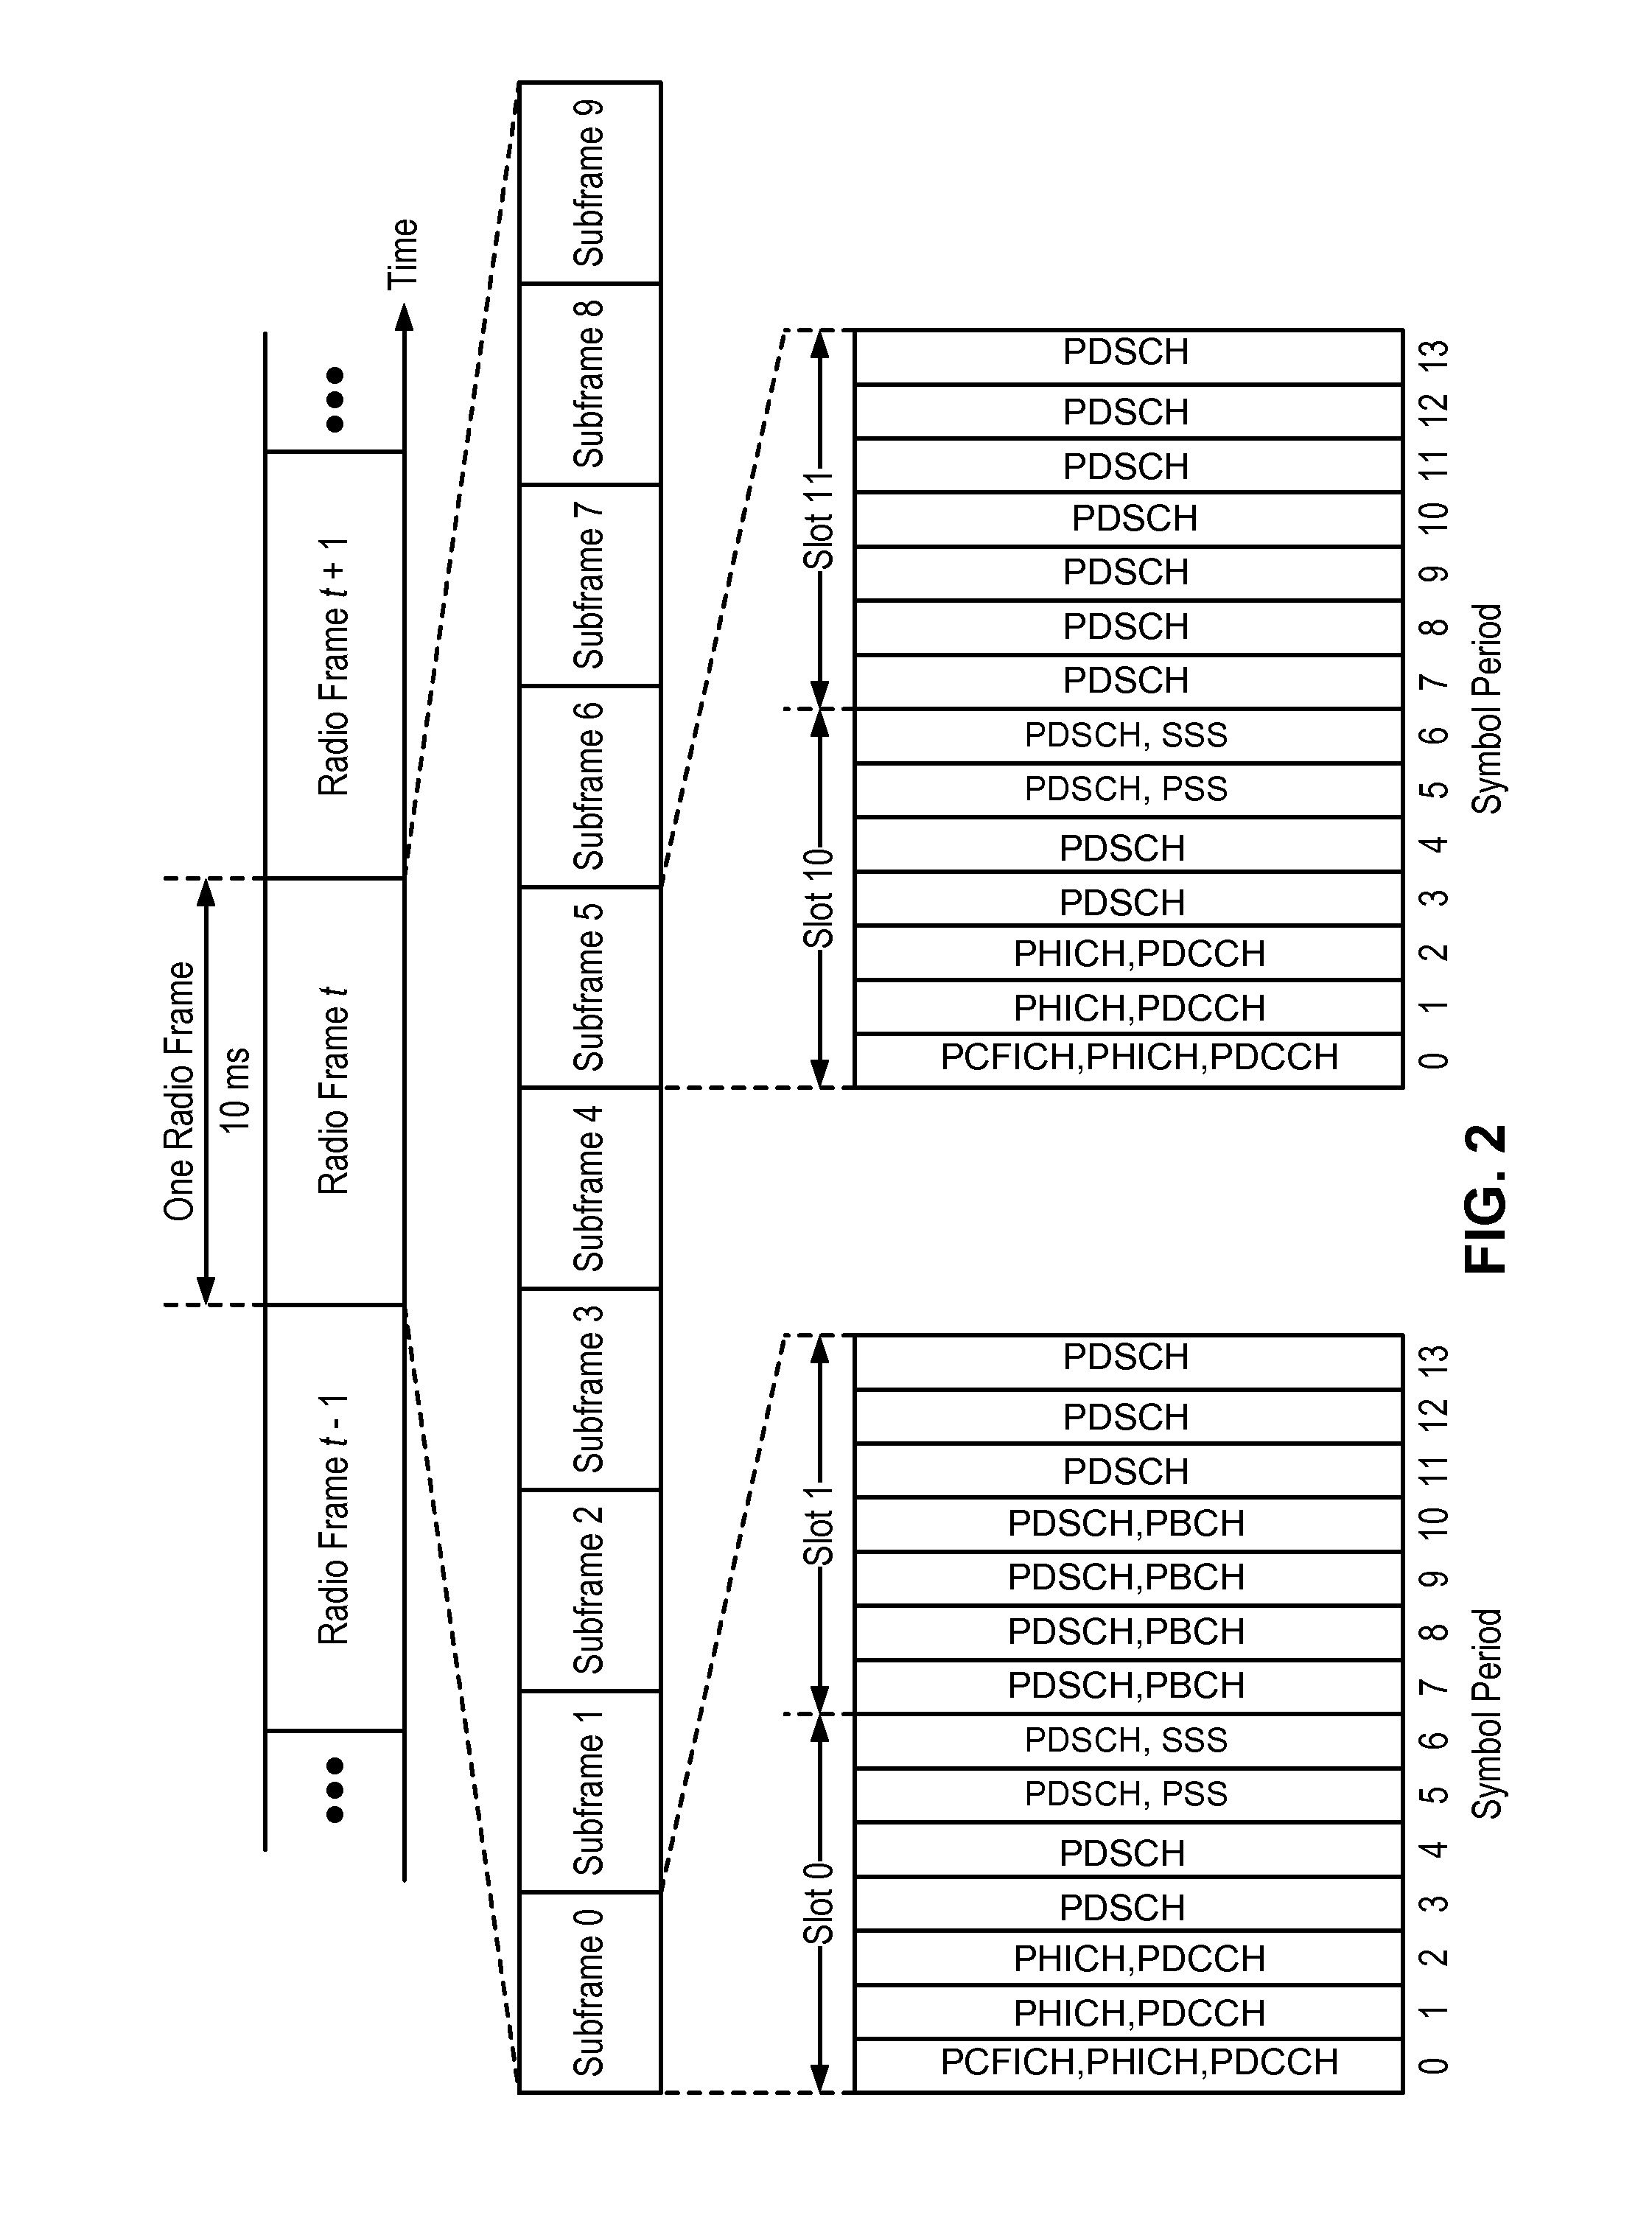 Techniques for performing carrier sense adaptive transmission in unlicensed spectrum